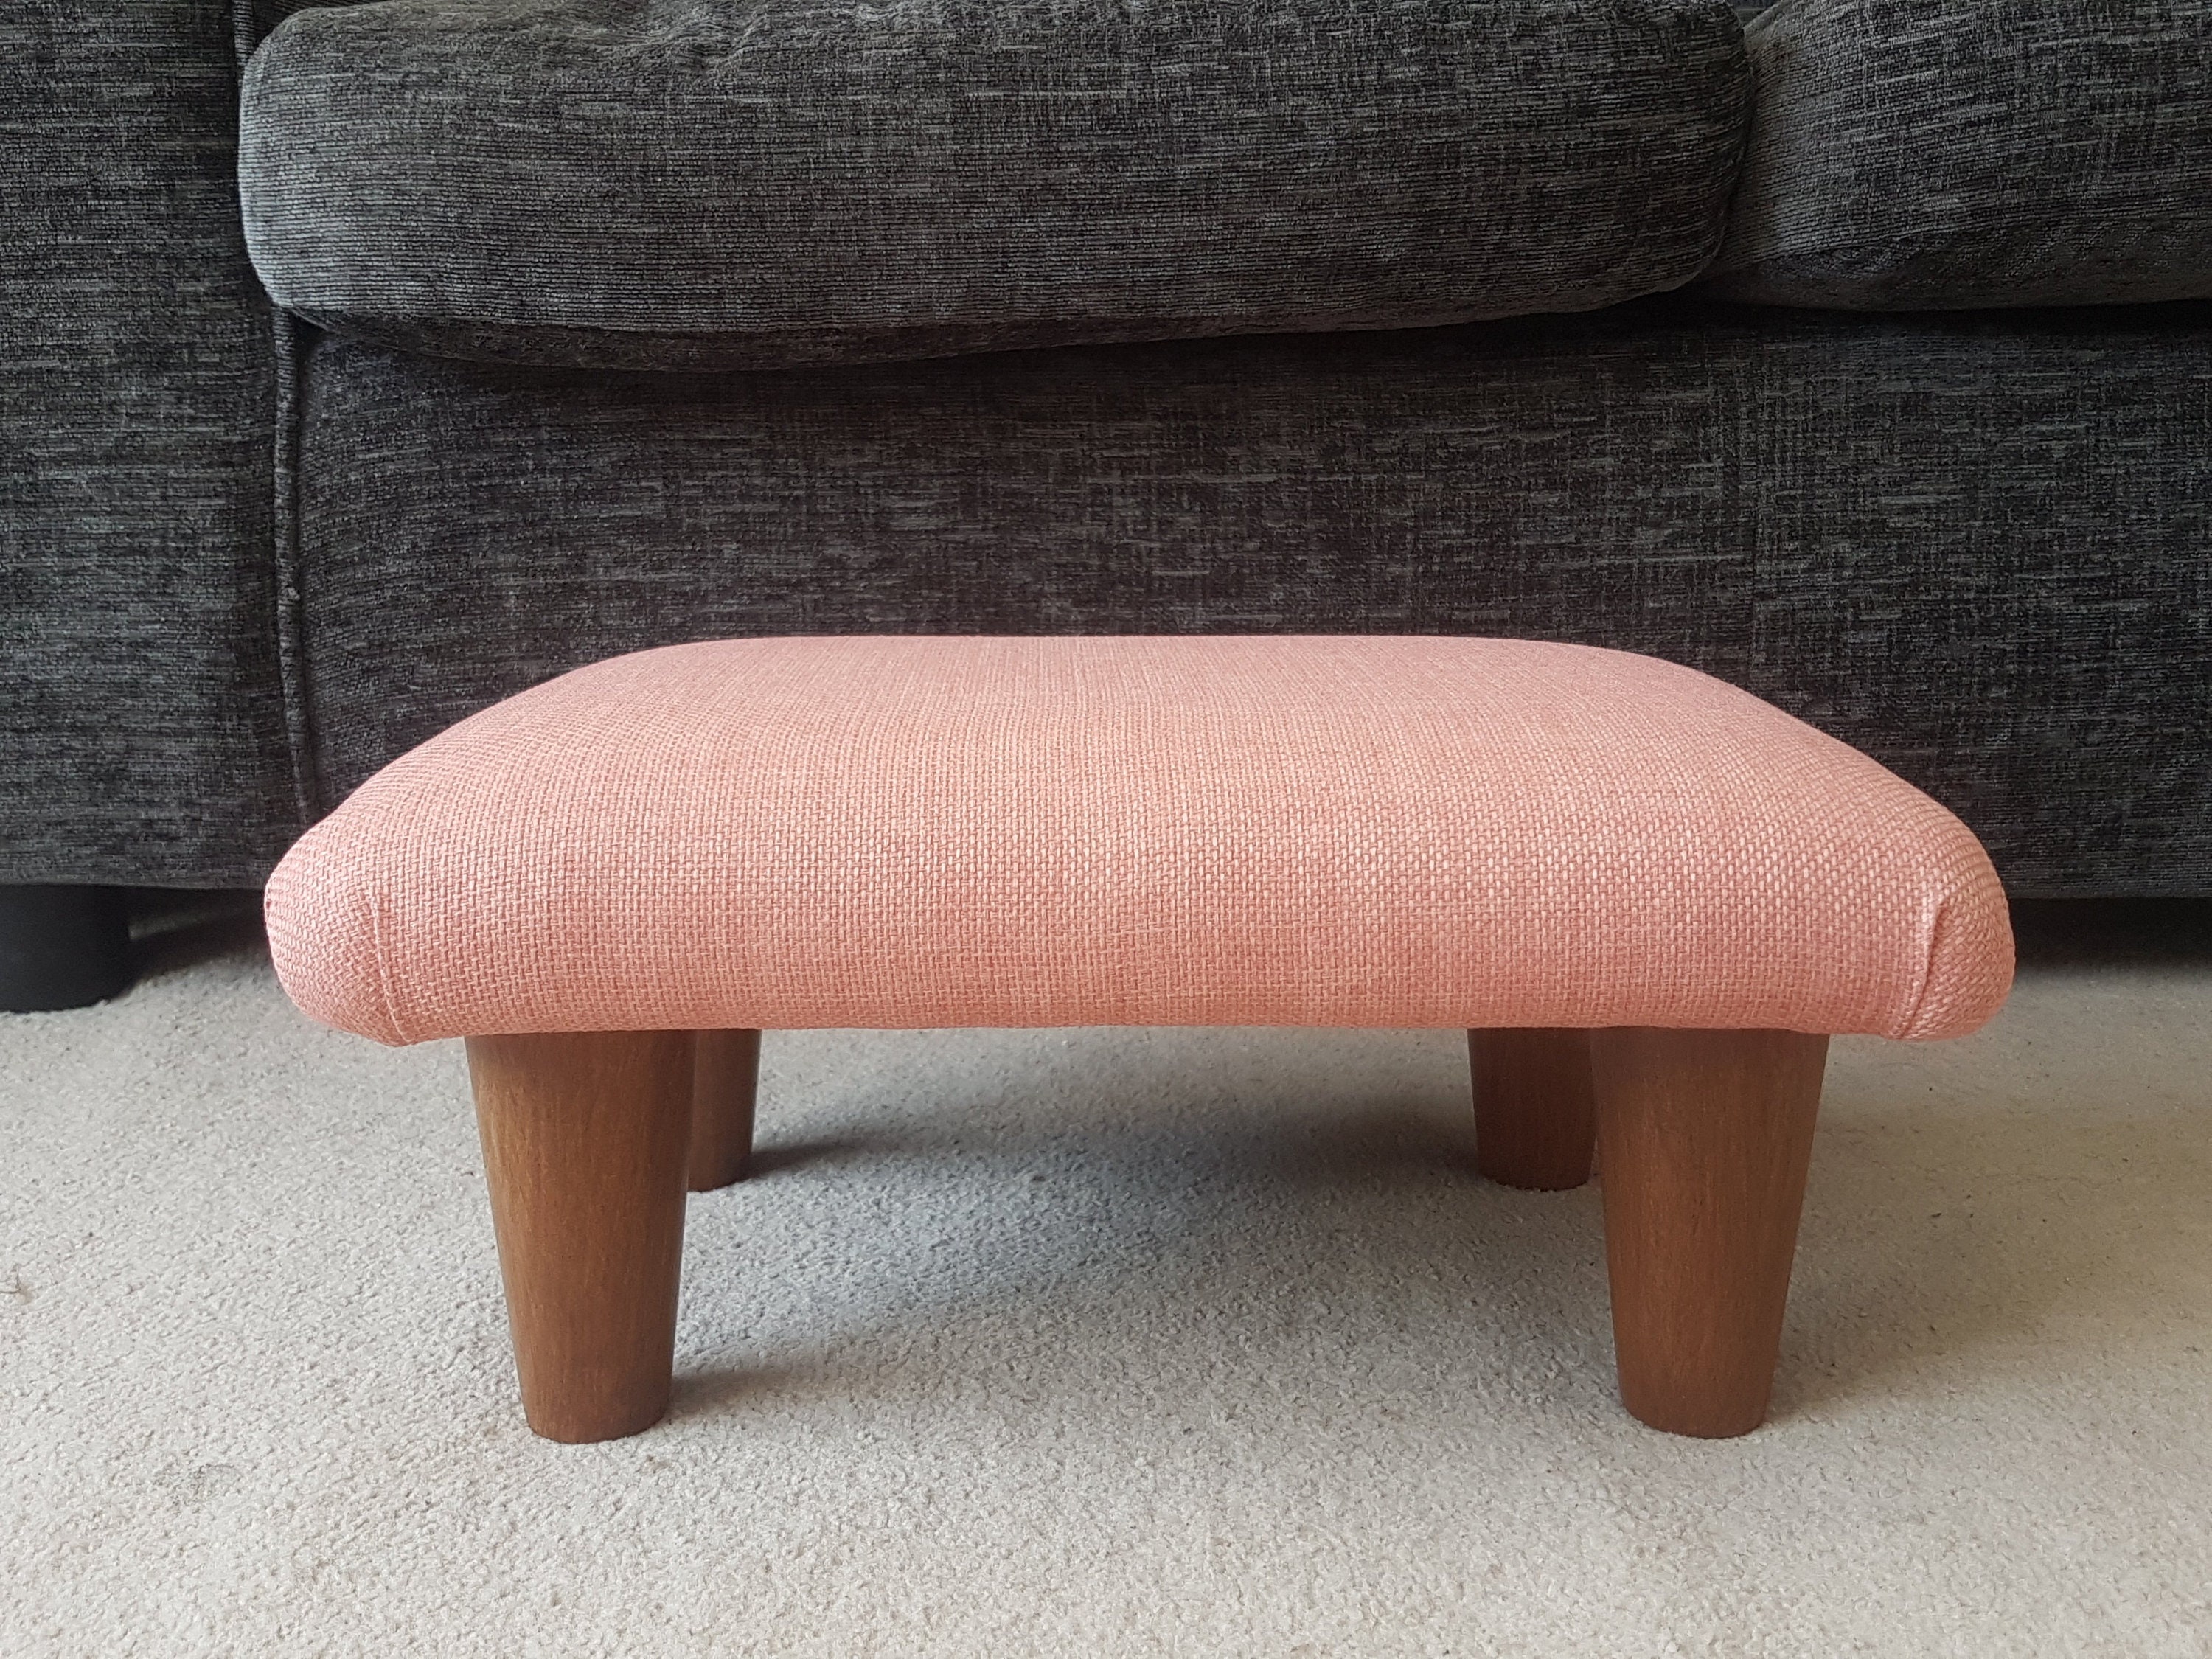 NEW Small Between 10-26 Cm 410 Solid Plain Footstool With Wooden or Plastic  Feet / Upholstered Stool Many Colours Footrest Bed Step Pupil 